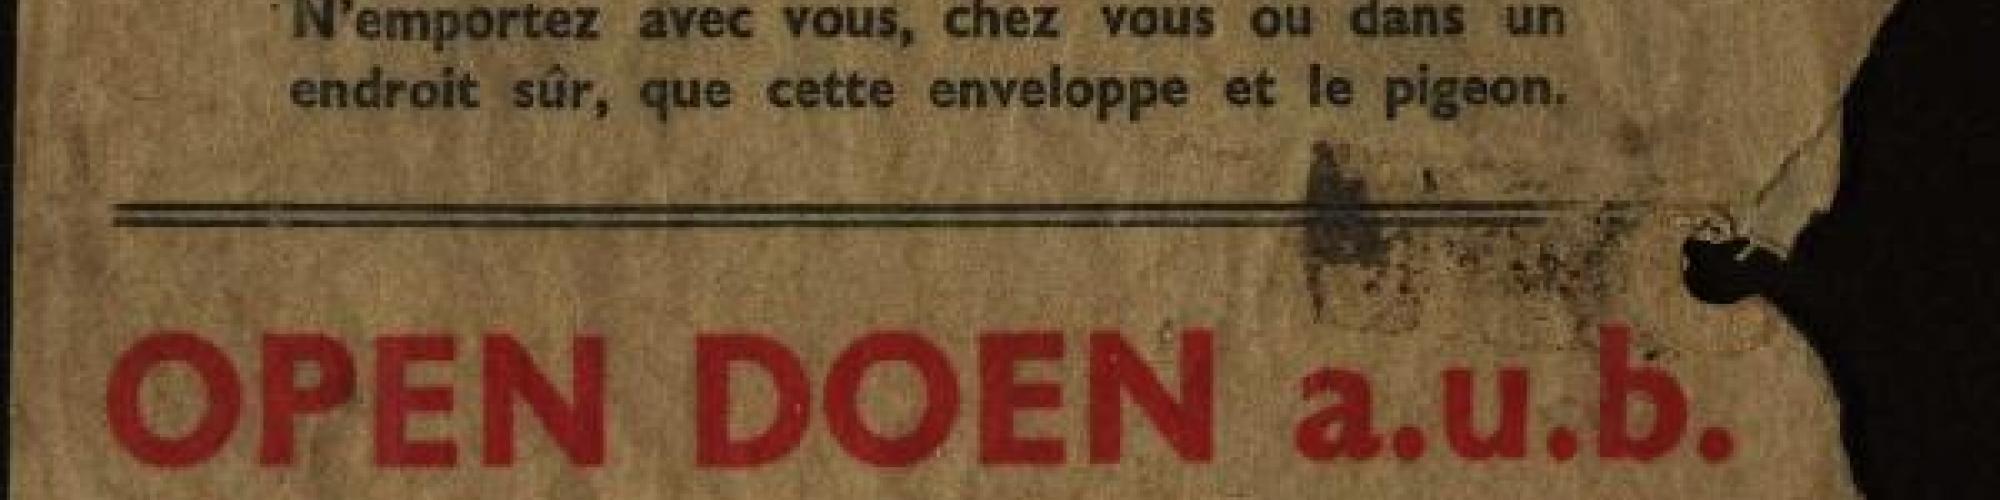 Allied leaflet airdropped over Belgium in 1944 (Collection of leaflets and official documents [AC 9/6]: nr. 285739), © CegeSoma/State Archives.